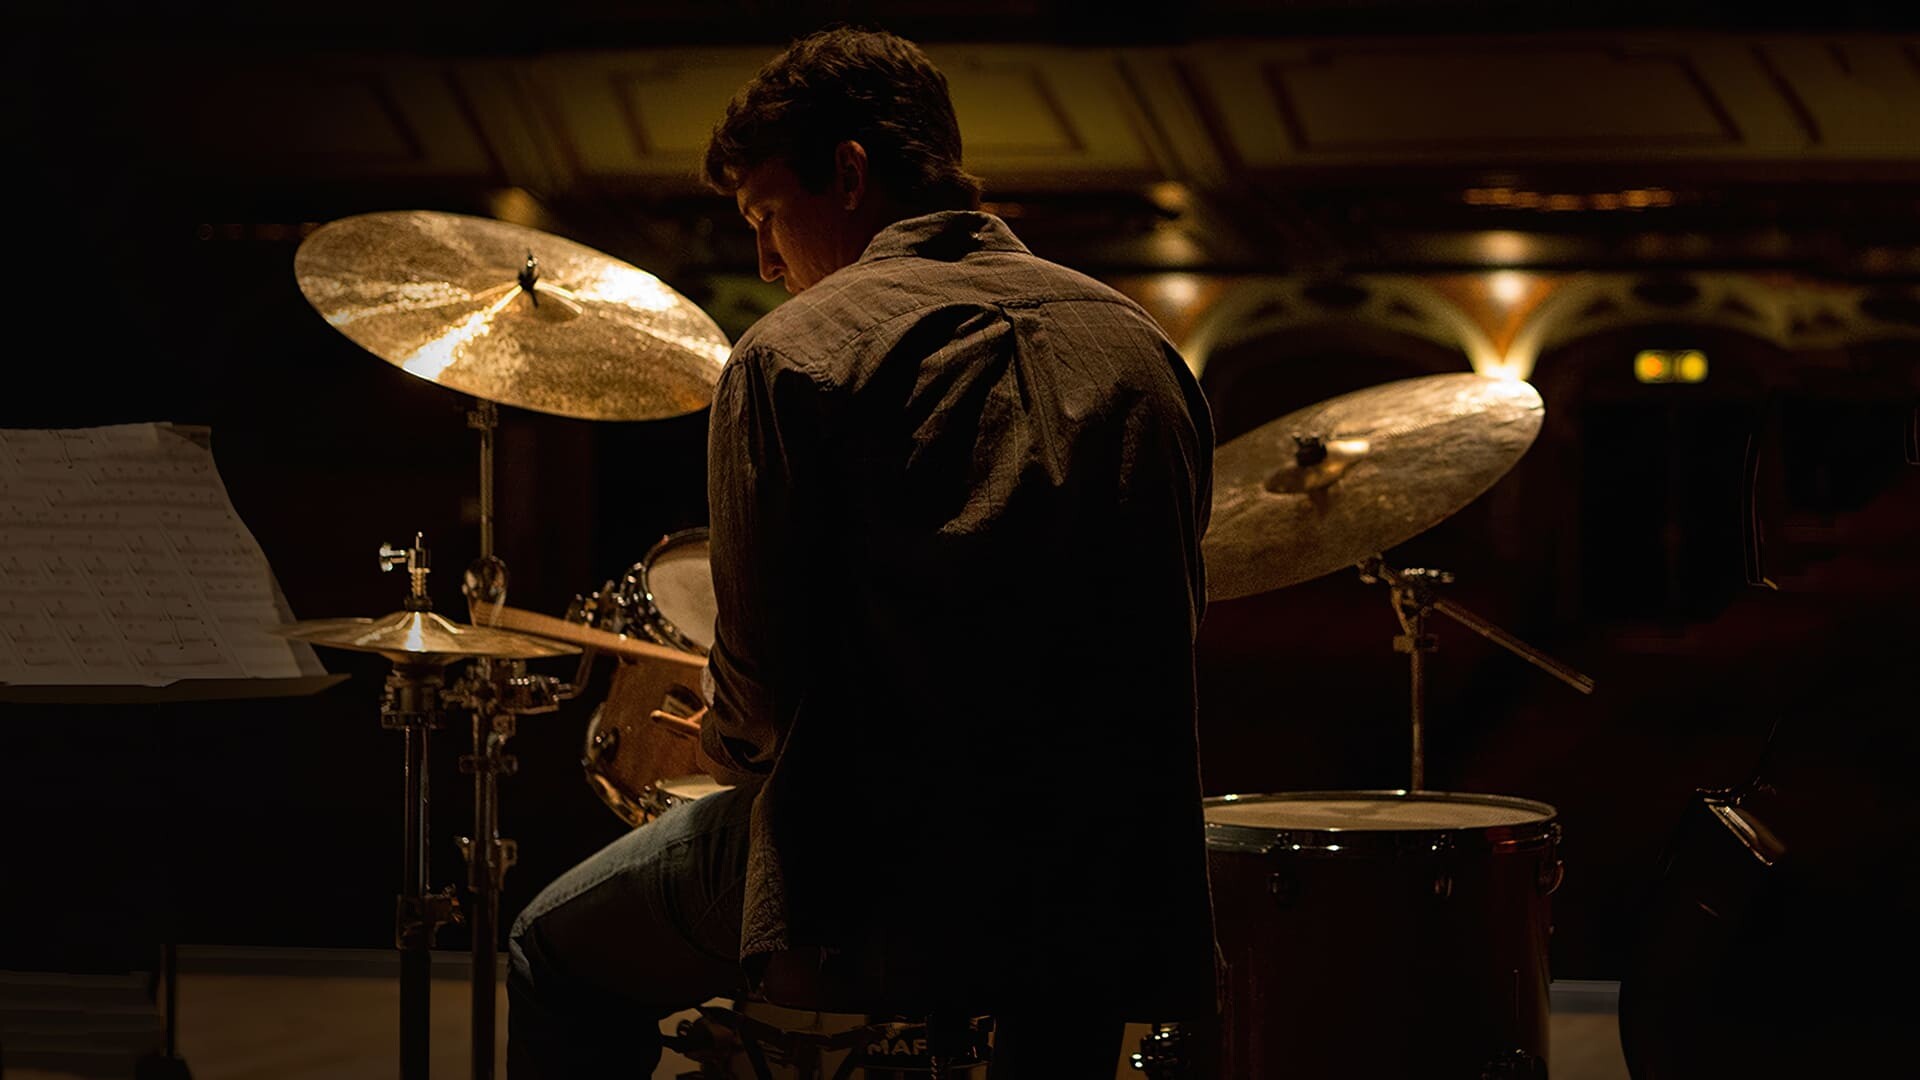 Whiplash: The film received the top audience and grand jury awards at the 2014 Sundance Film Festival. 1920x1080 Full HD Background.